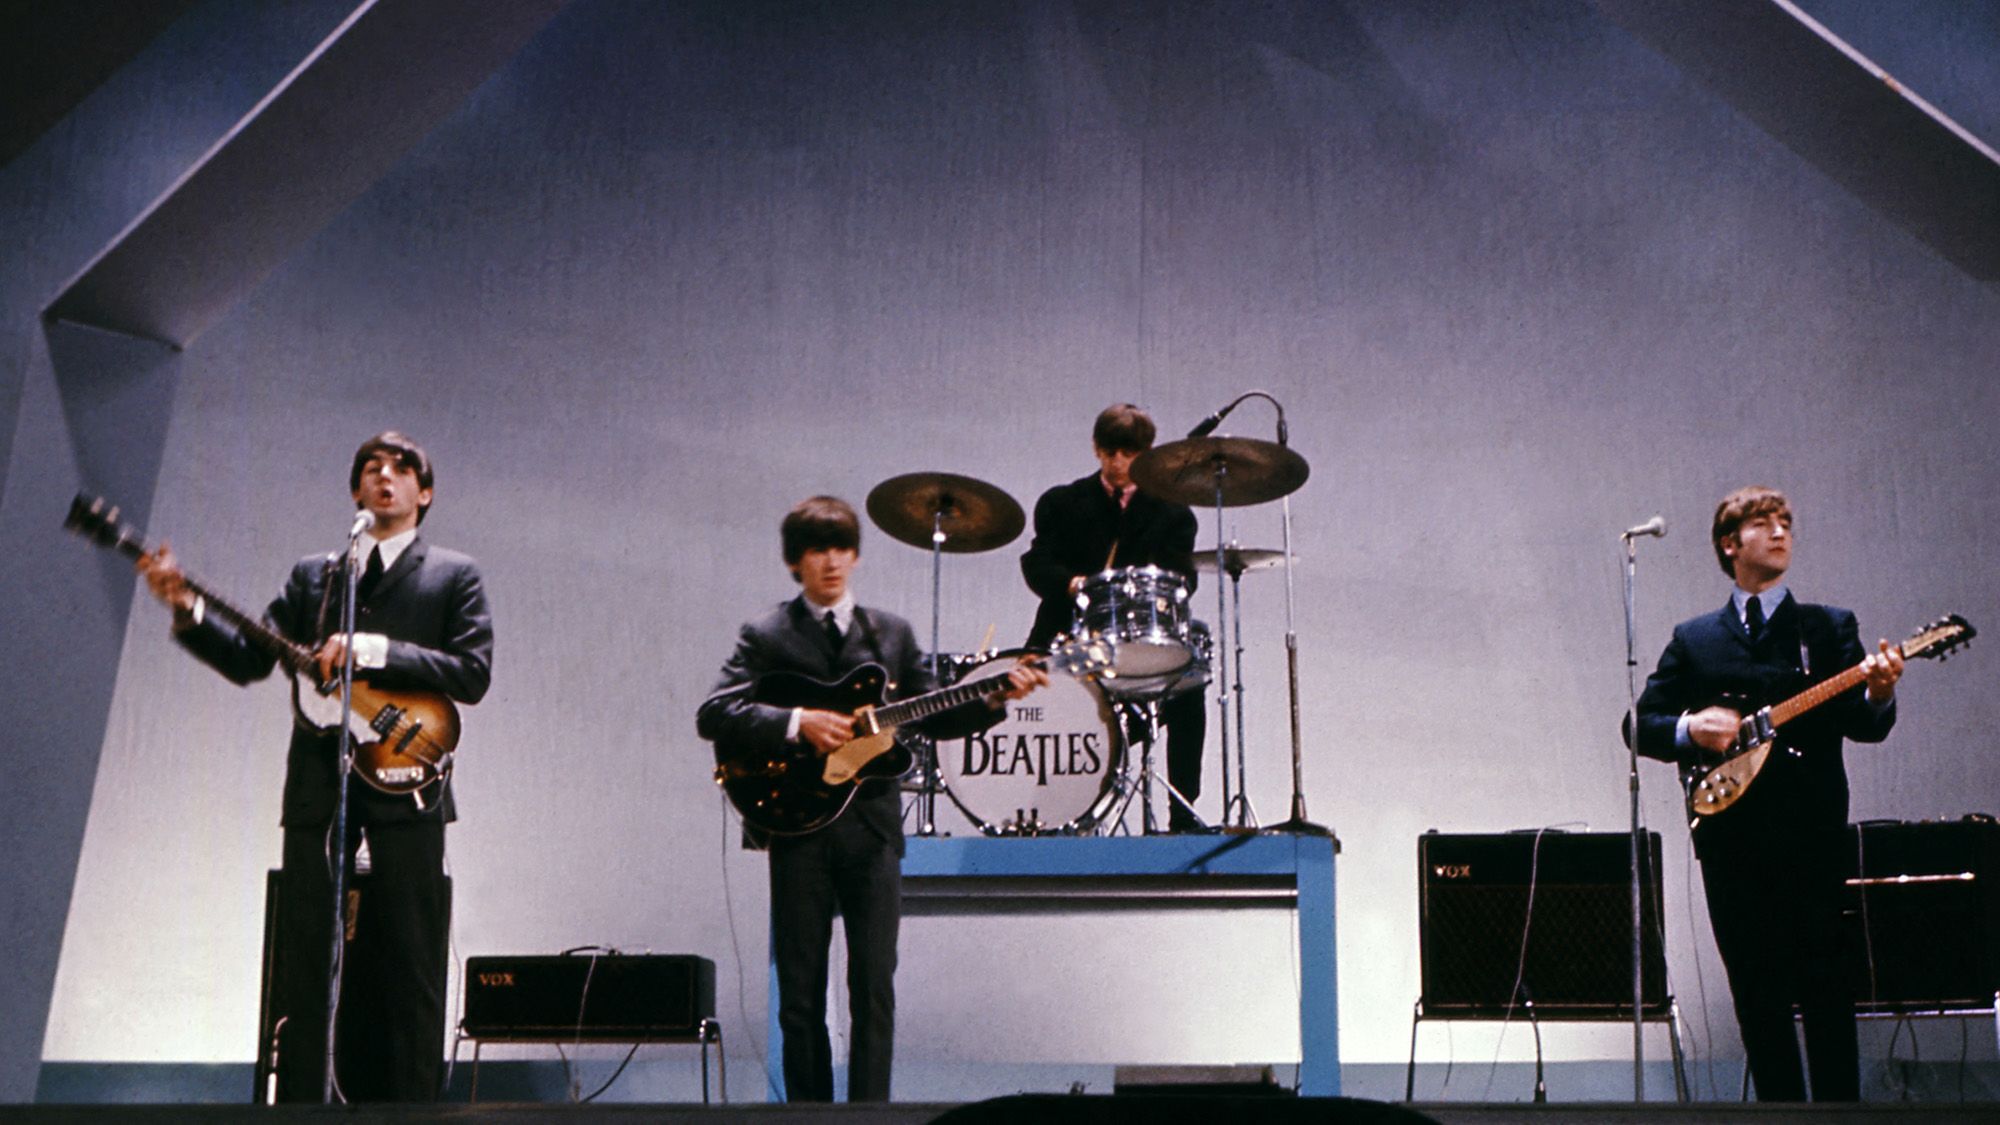 The Beatles (from left to right), Paul McCartney (playing the stolen bass), George Harrison, Ringo Starr and John Lennon perform during a concert on July 29, 1965.